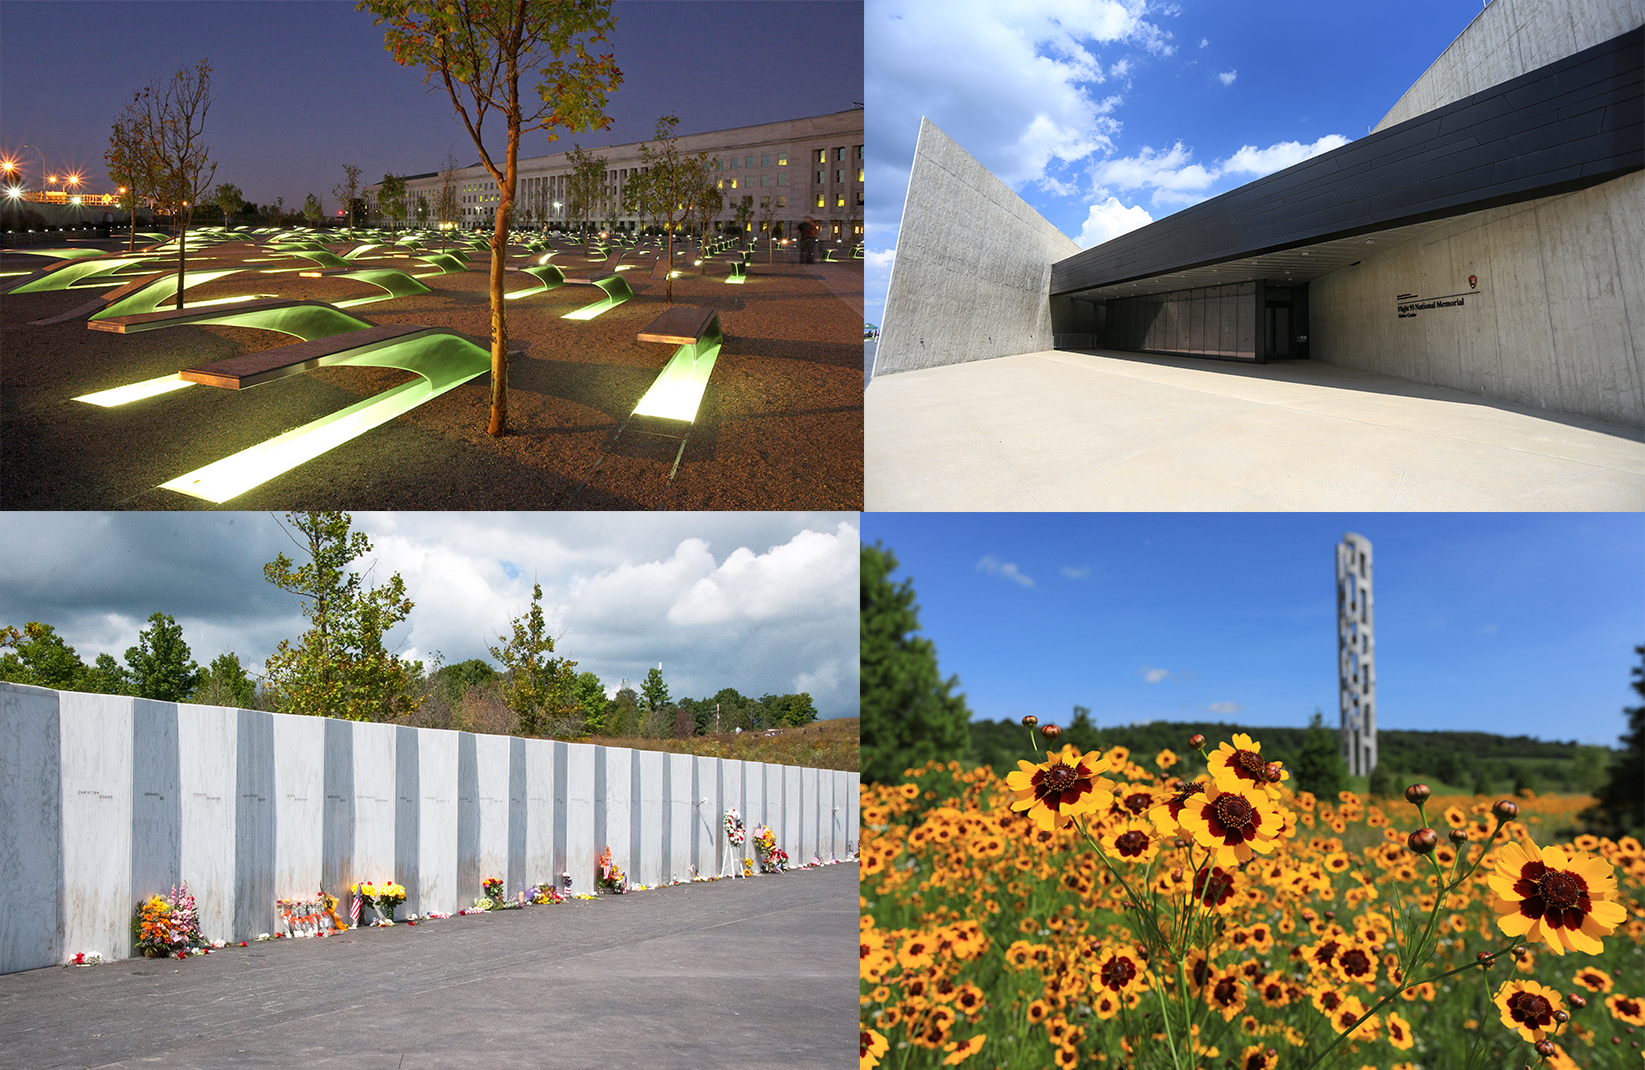 pictures of buildings and landscapes that are memorial sites for the Sept. 11 terrorist attacks